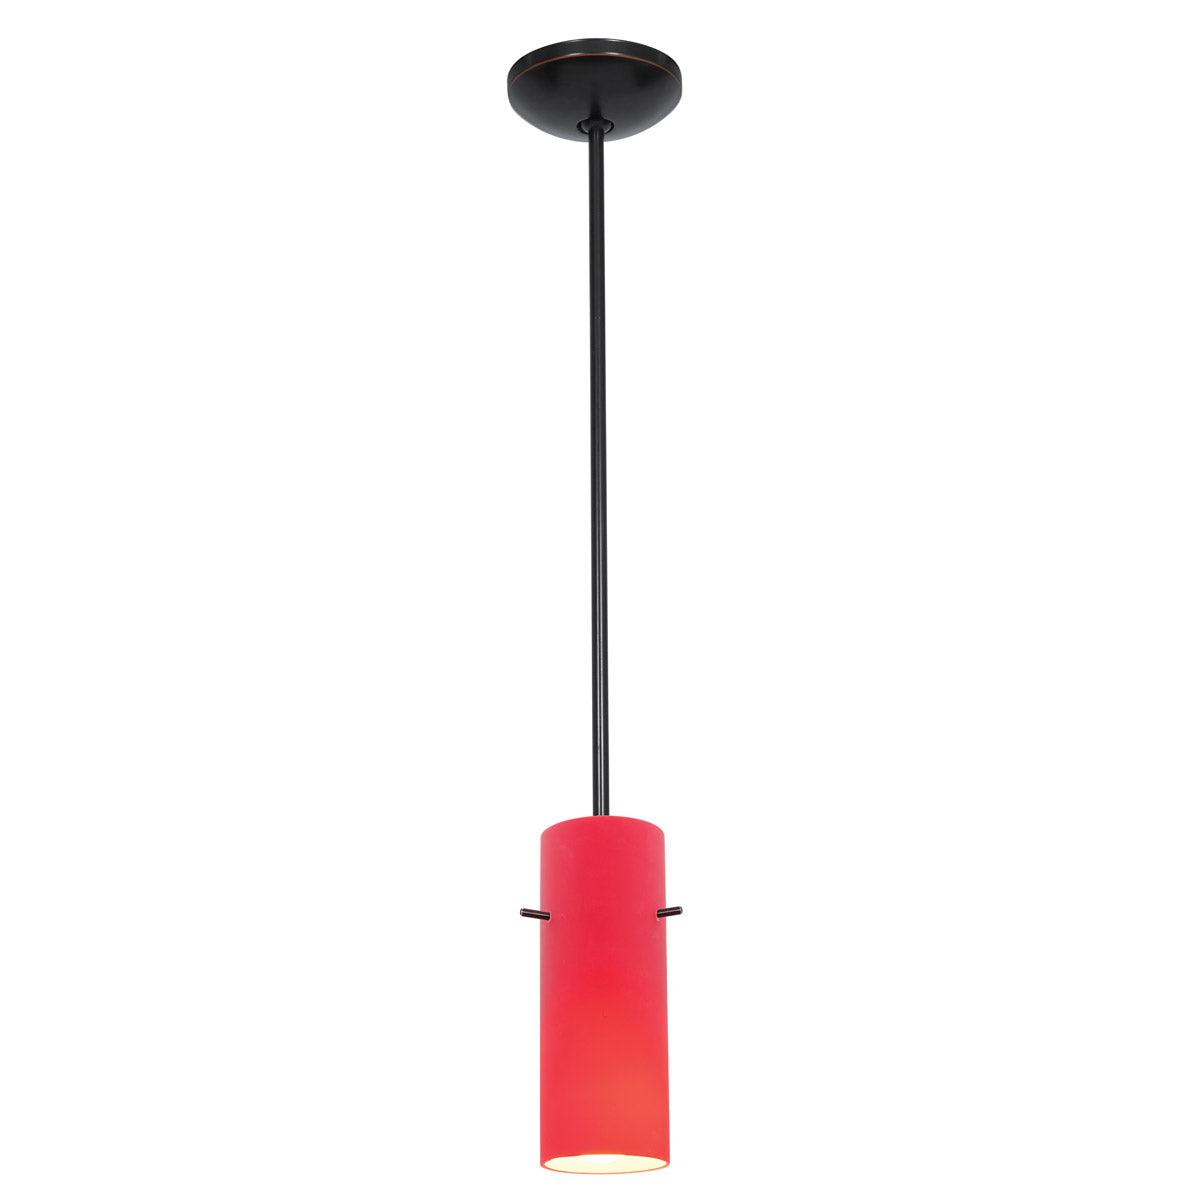 Cylinder 4 in. LED Pendant Light, Red Glass - Bees Lighting